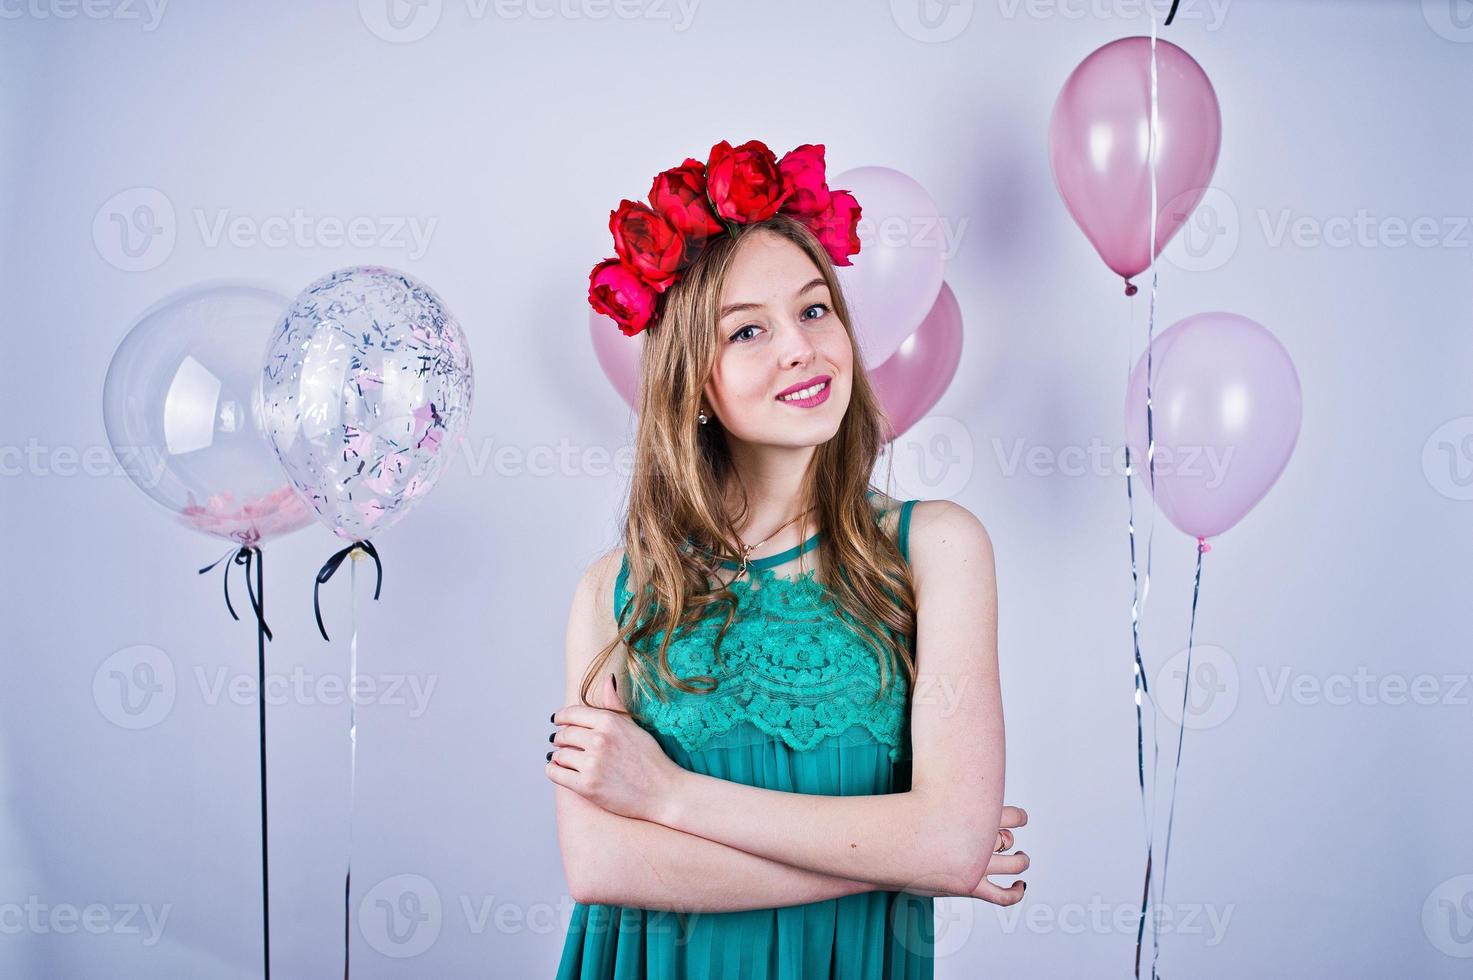 Happy girl in green turqoise dress and wreath with colored balloons isolated on white. Celebrating birthday theme. photo